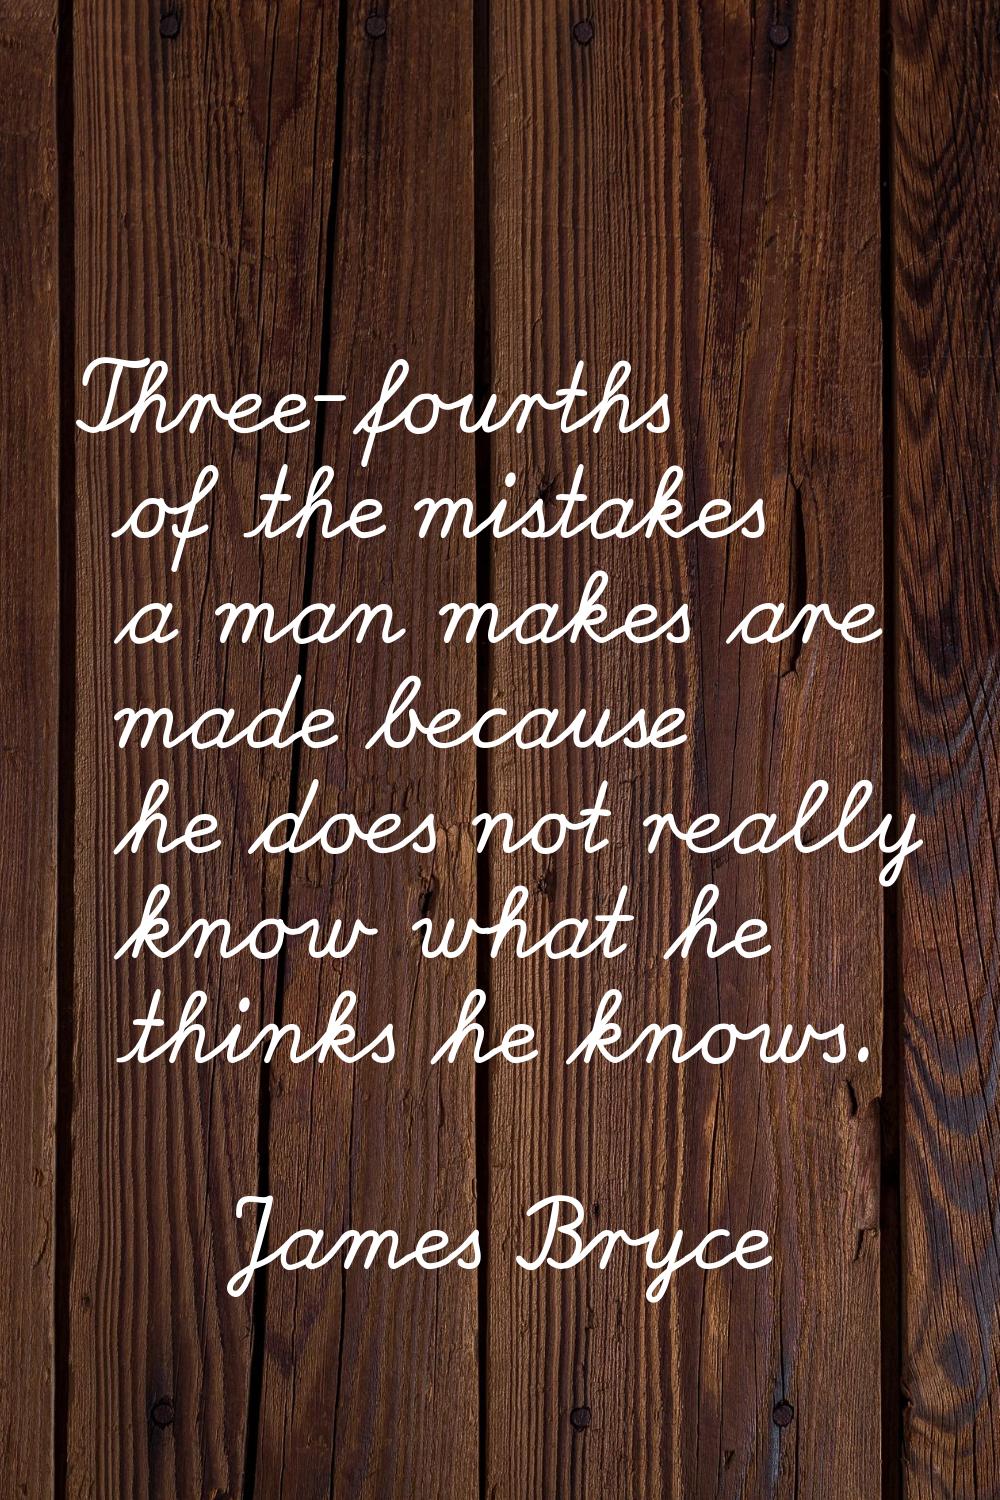 Three-fourths of the mistakes a man makes are made because he does not really know what he thinks h